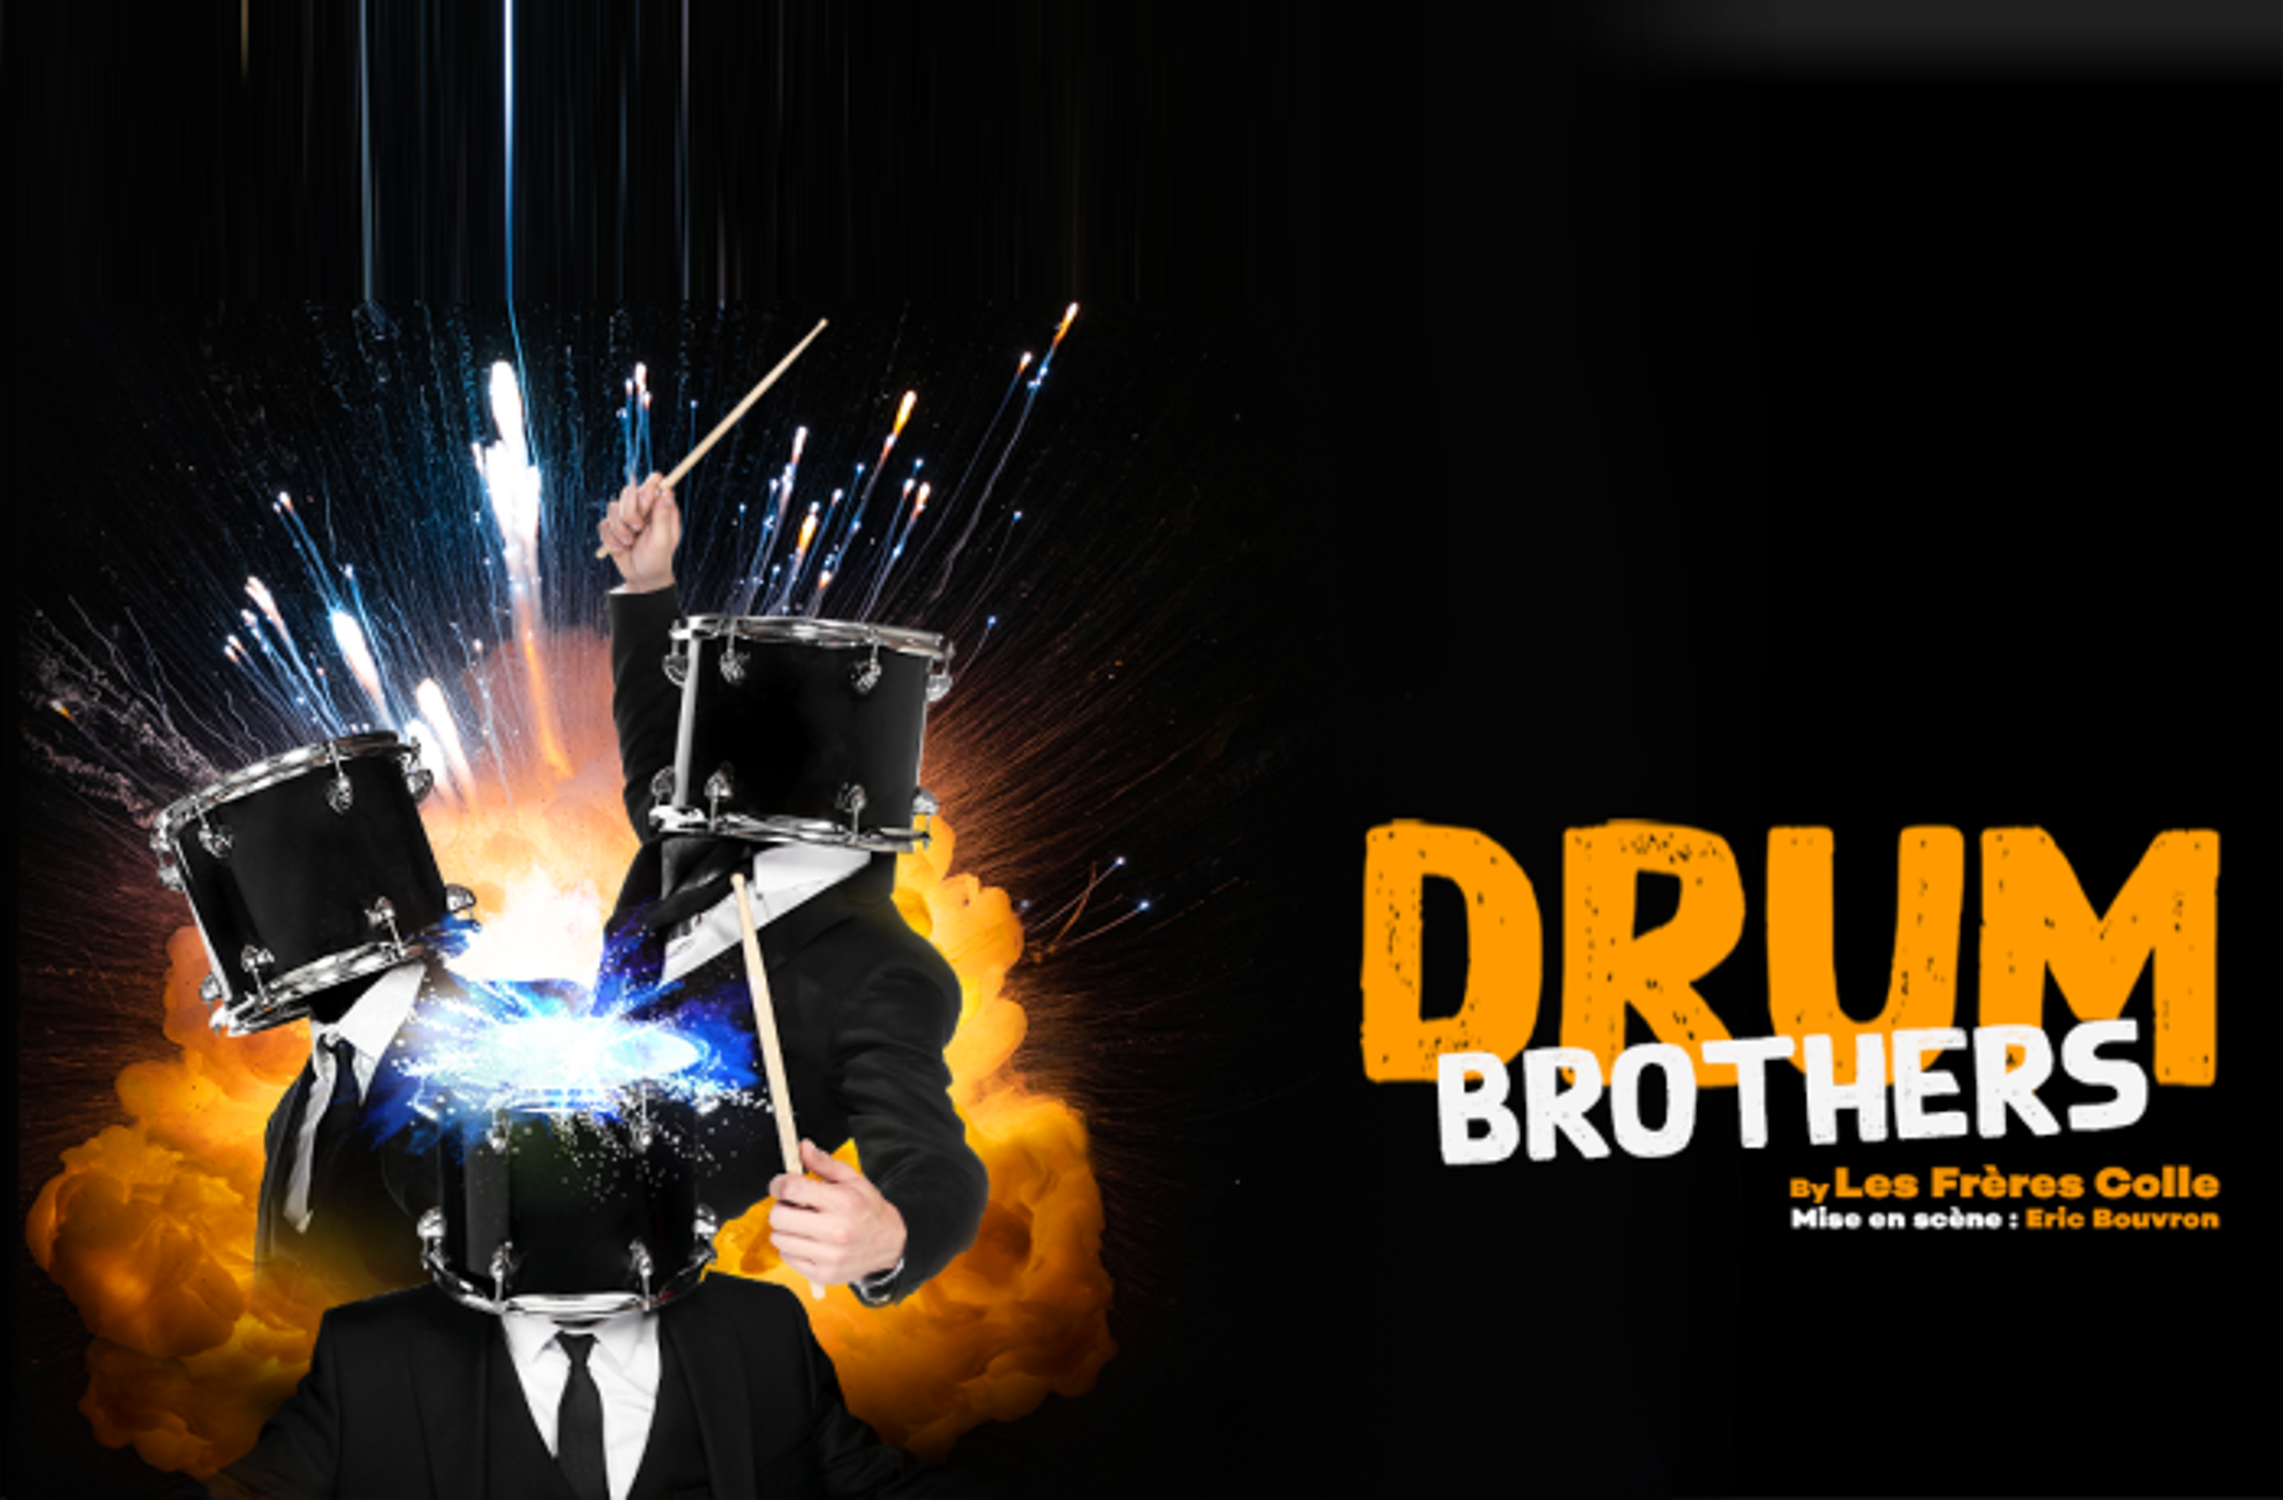 DRUM BROTHERS by Les Frères Colle